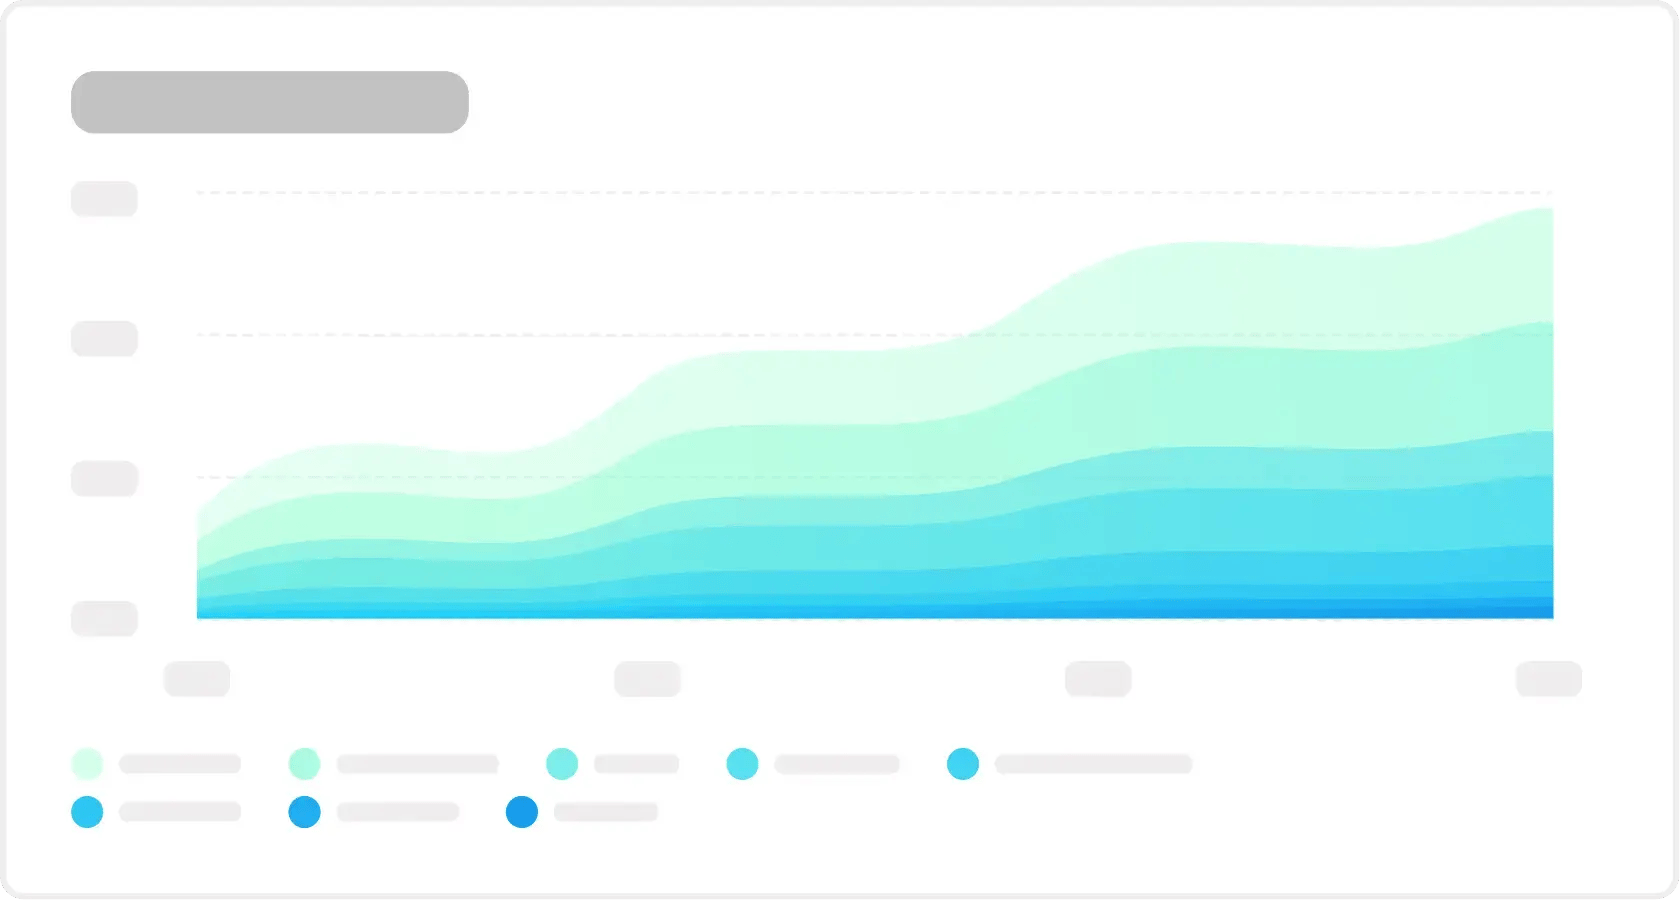 Lead Generation Growth Graph Over Time